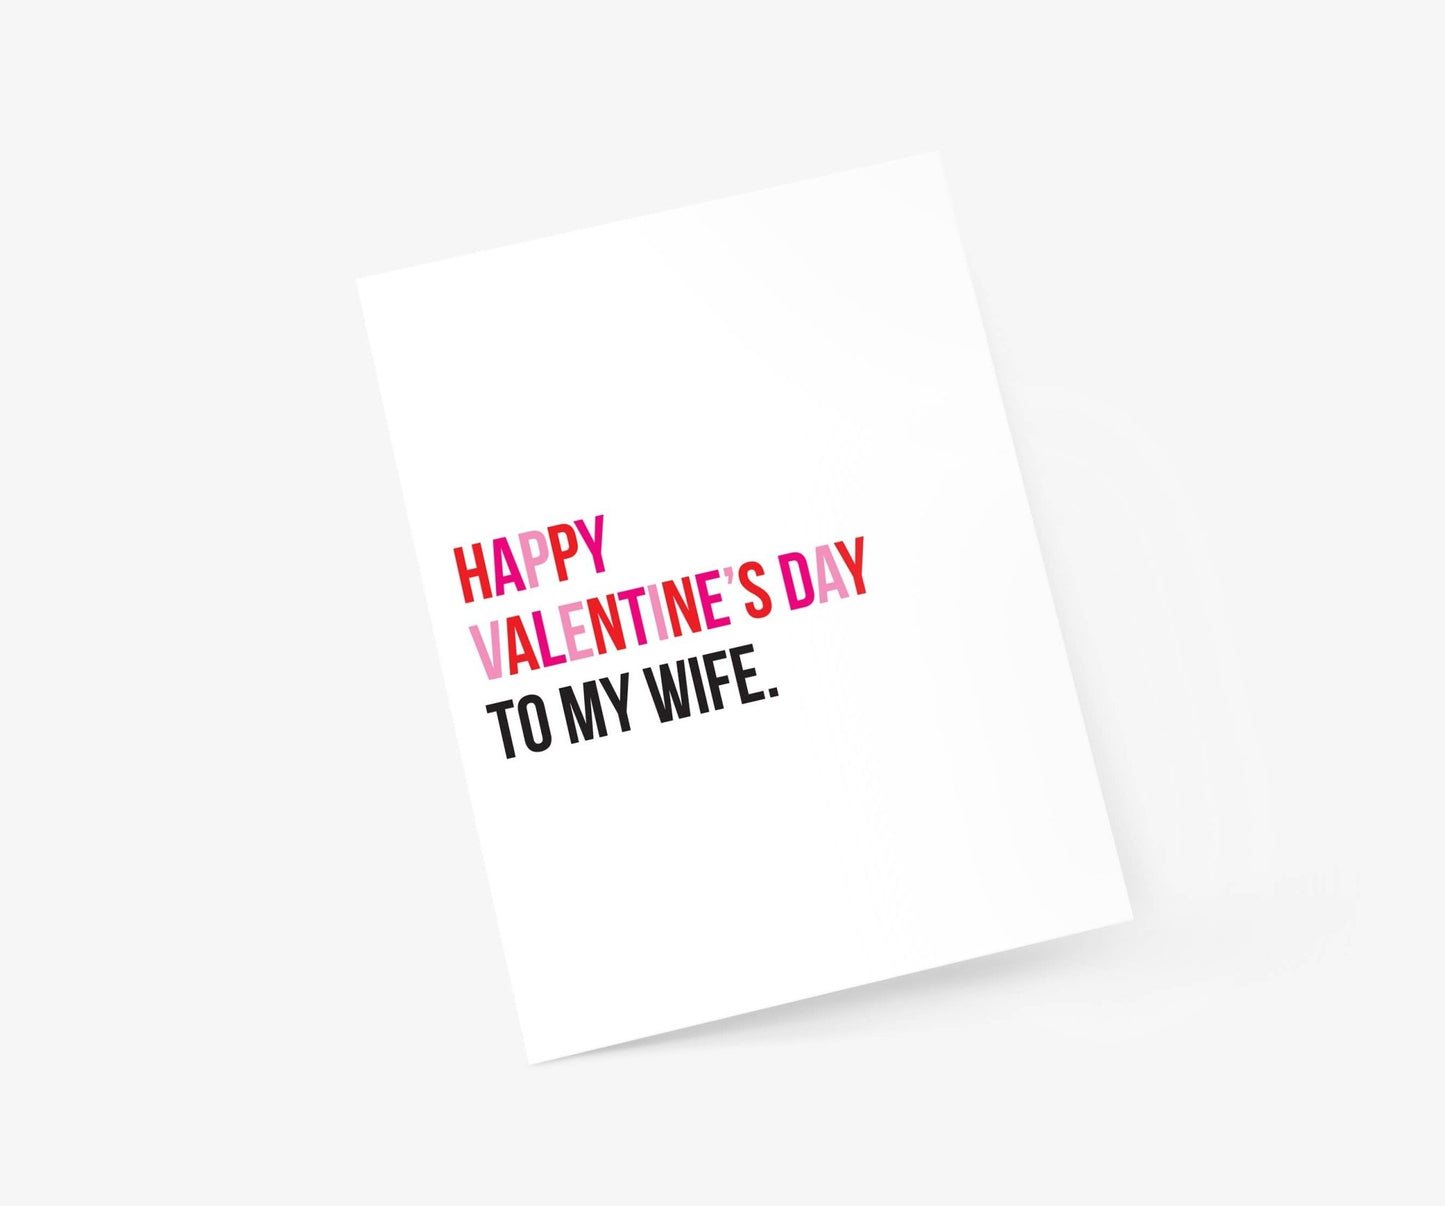 To My Wife - Valentine's Day Card - PaperGeenius